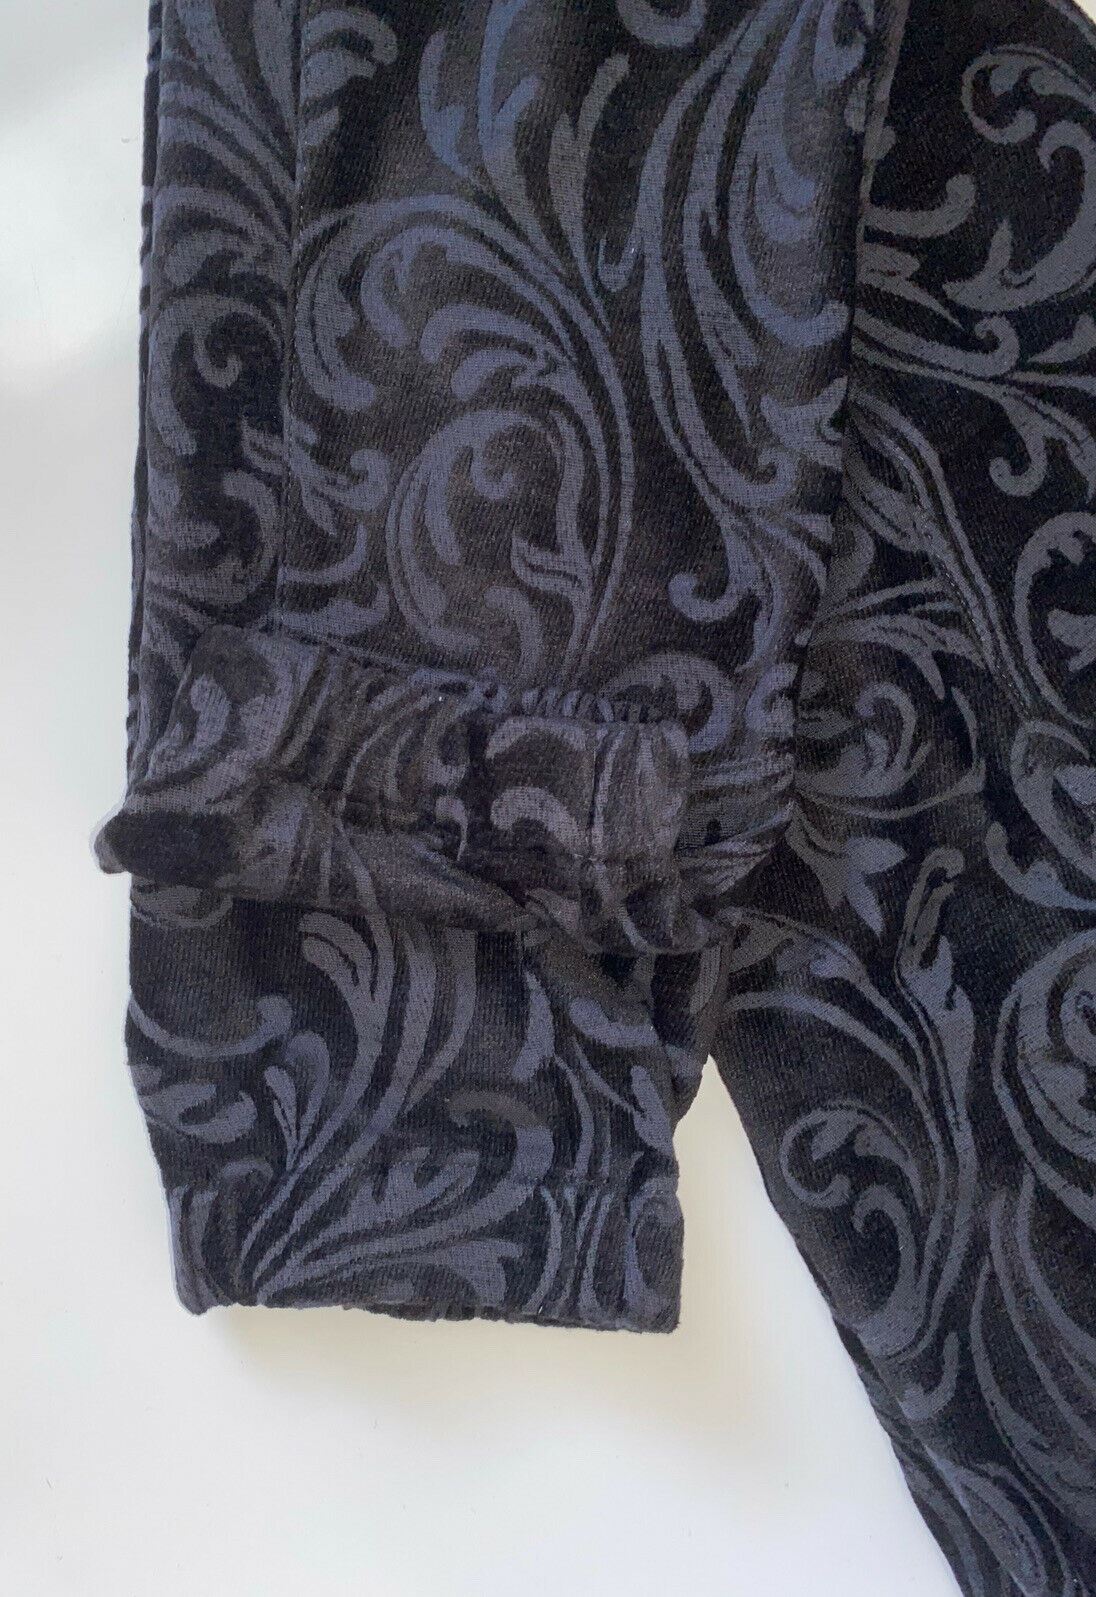 NWT $975 Versace Men's Black Activewear Pants Size Medium Made in Italy A79524